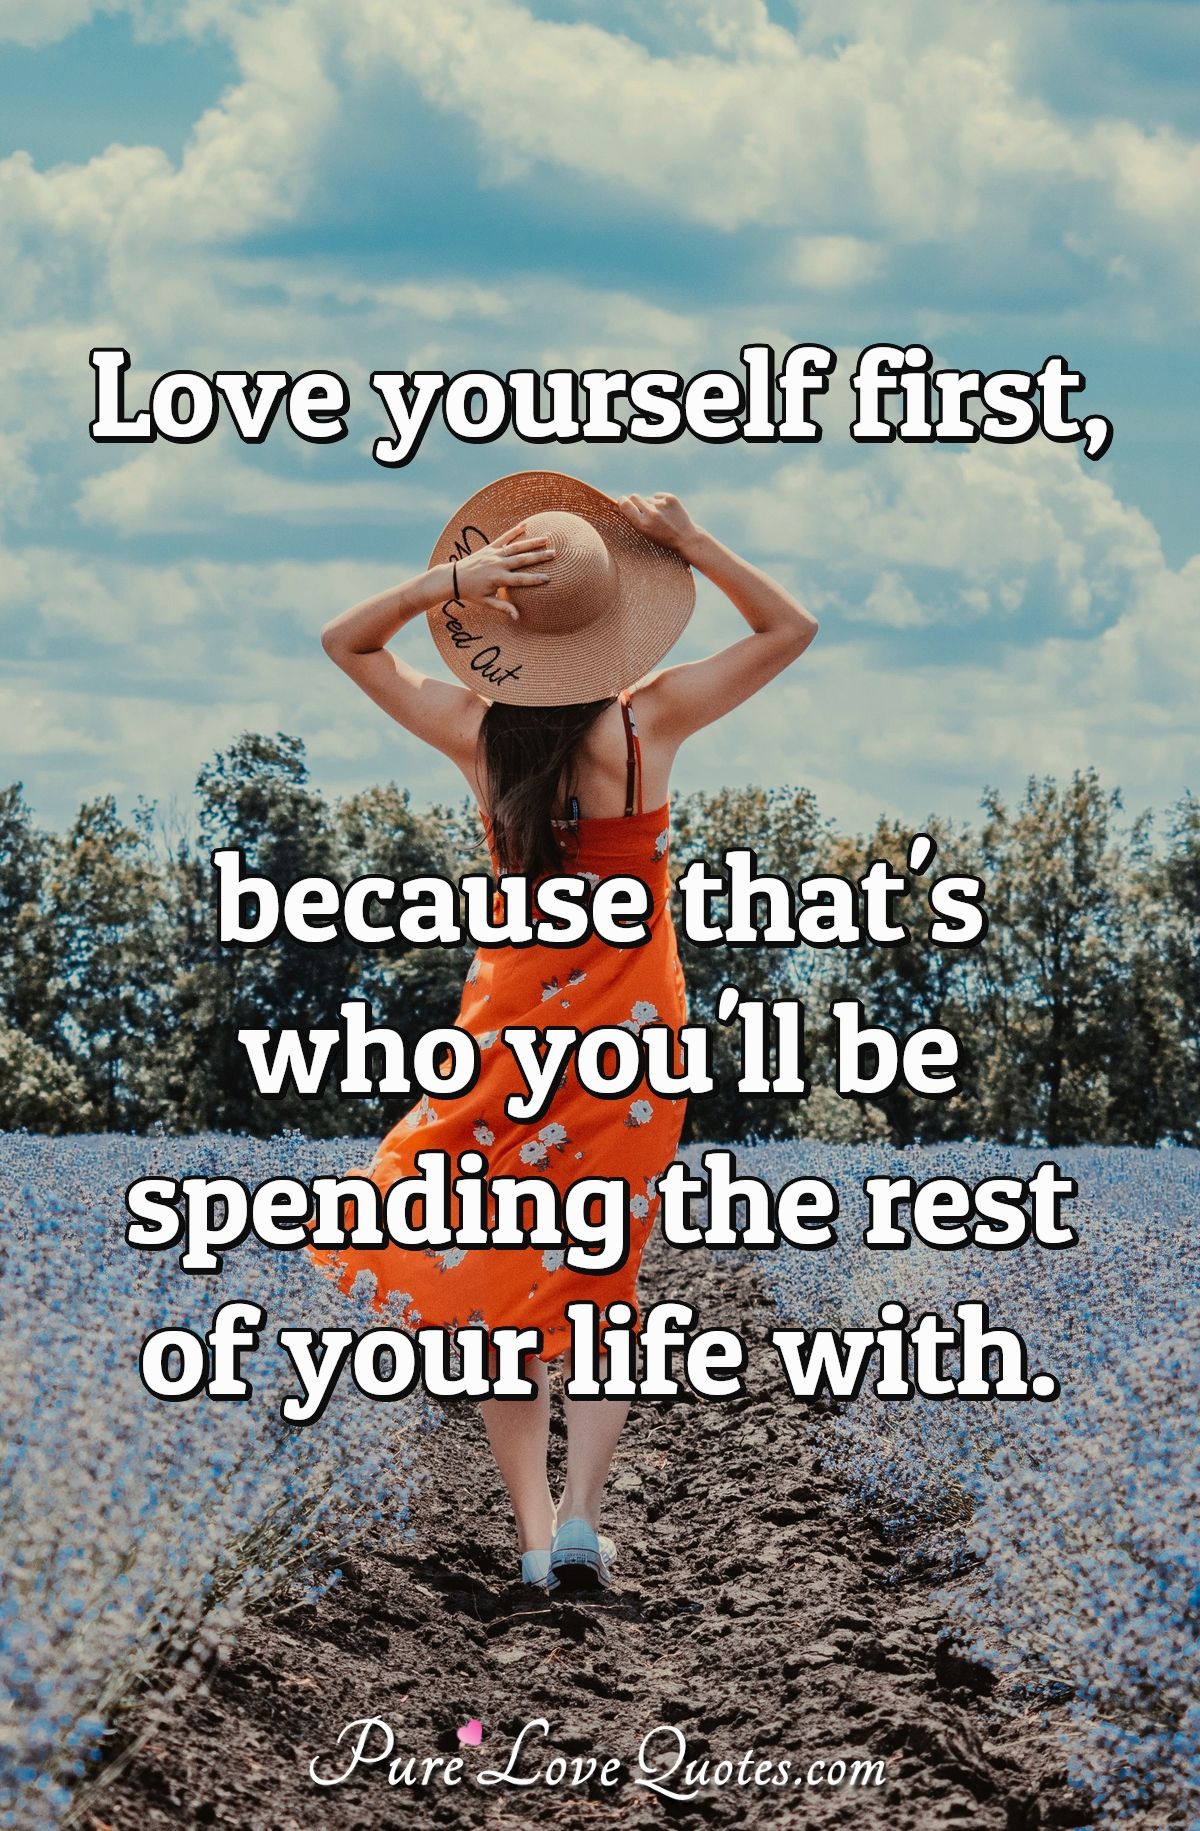 Love yourself first, because that's who you'll be spending the rest of